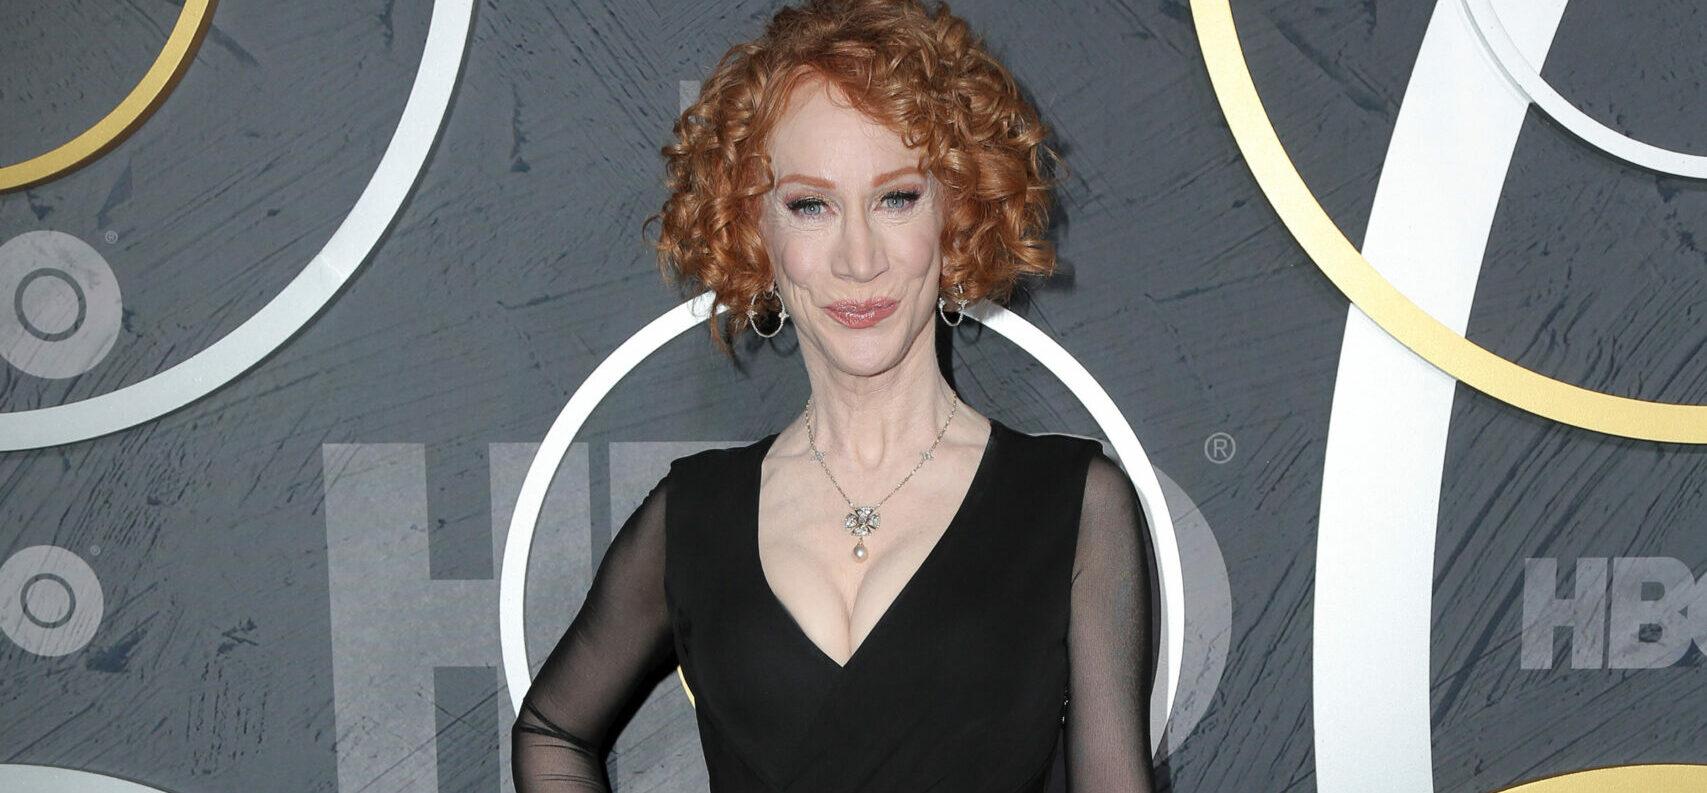 Kathy Griffin Has Some Choice Words For Male Comedians: ‘They’re All Pigs’